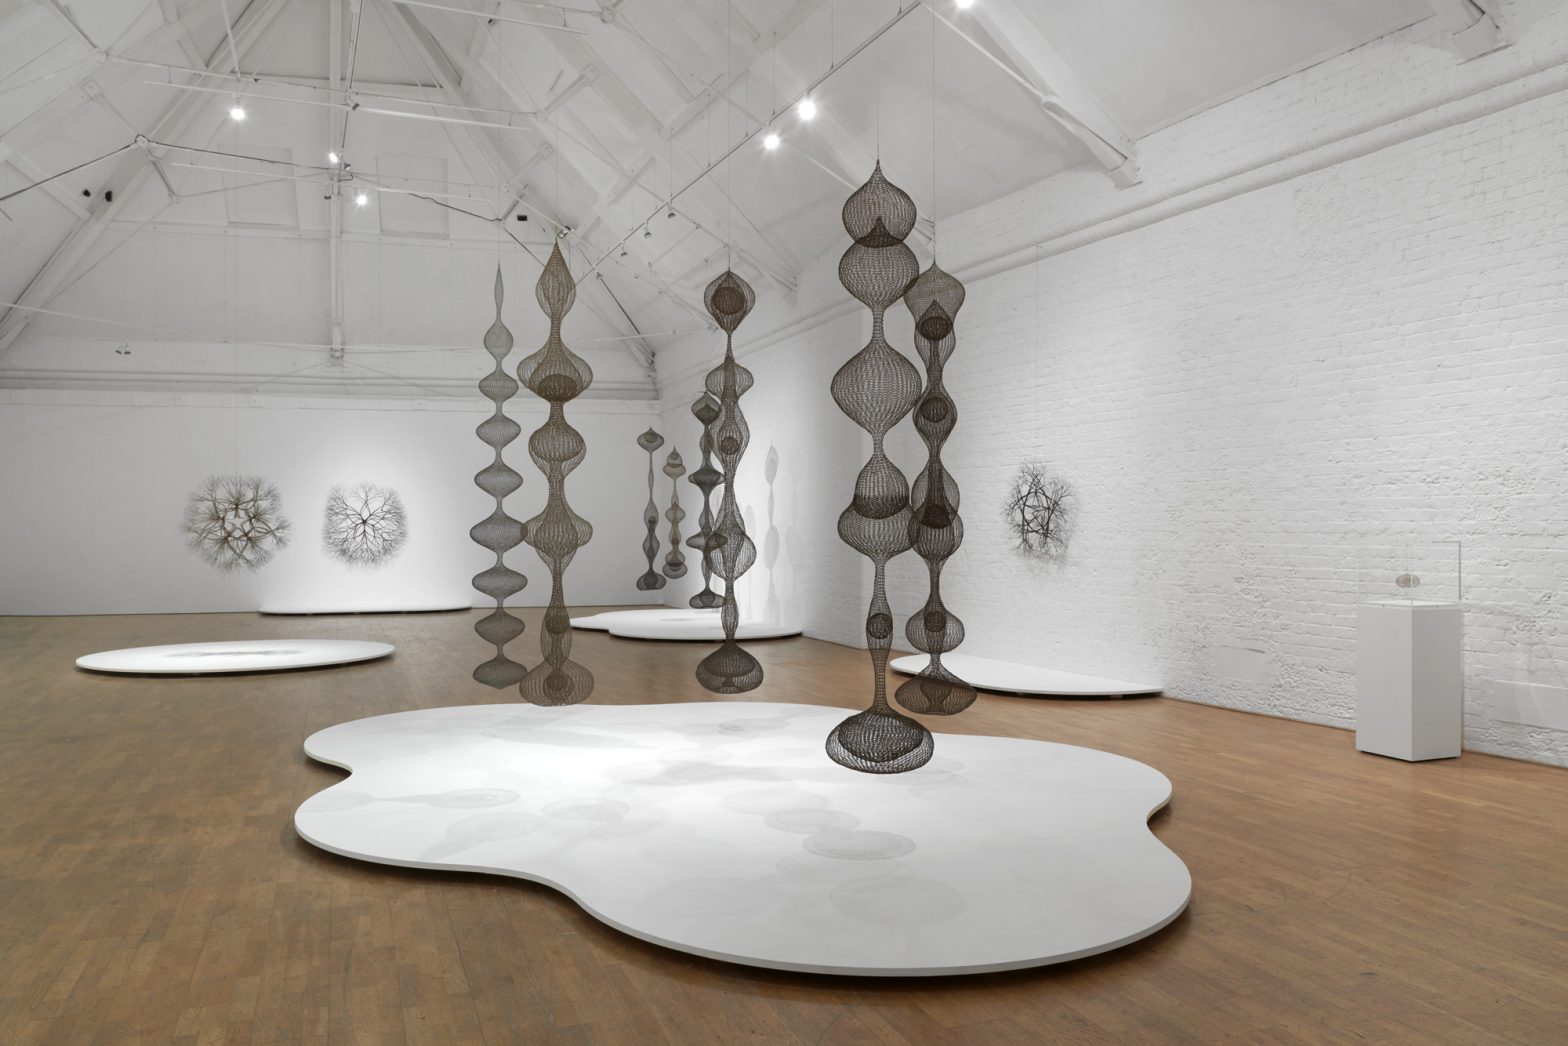 Several sculptures hanging from a high ceiling. They are made of looped wire and form long vertical abstract bulbous shapes. A white flat abstract form is on the floor beneath them. Wire sculptures hang on the walls behind them.